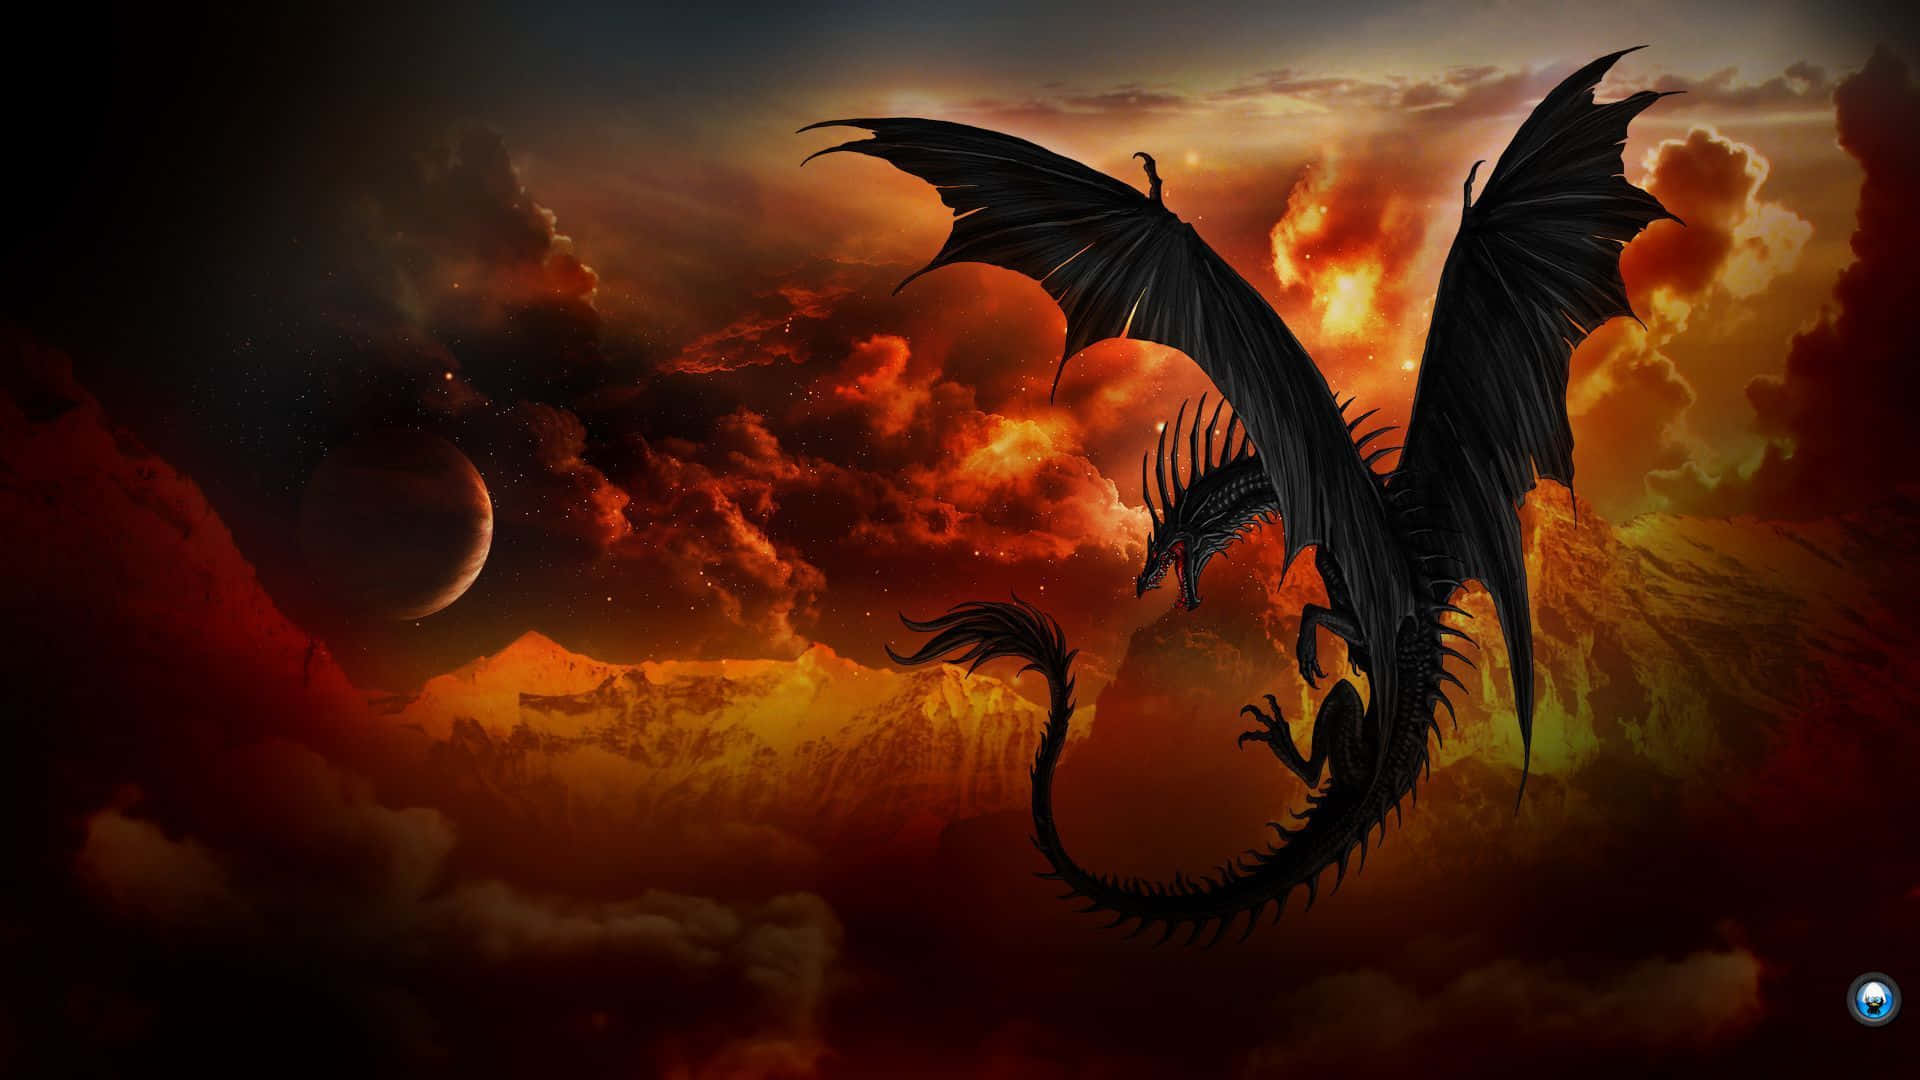 The majestic and powerful Awesome Dragon Wallpaper